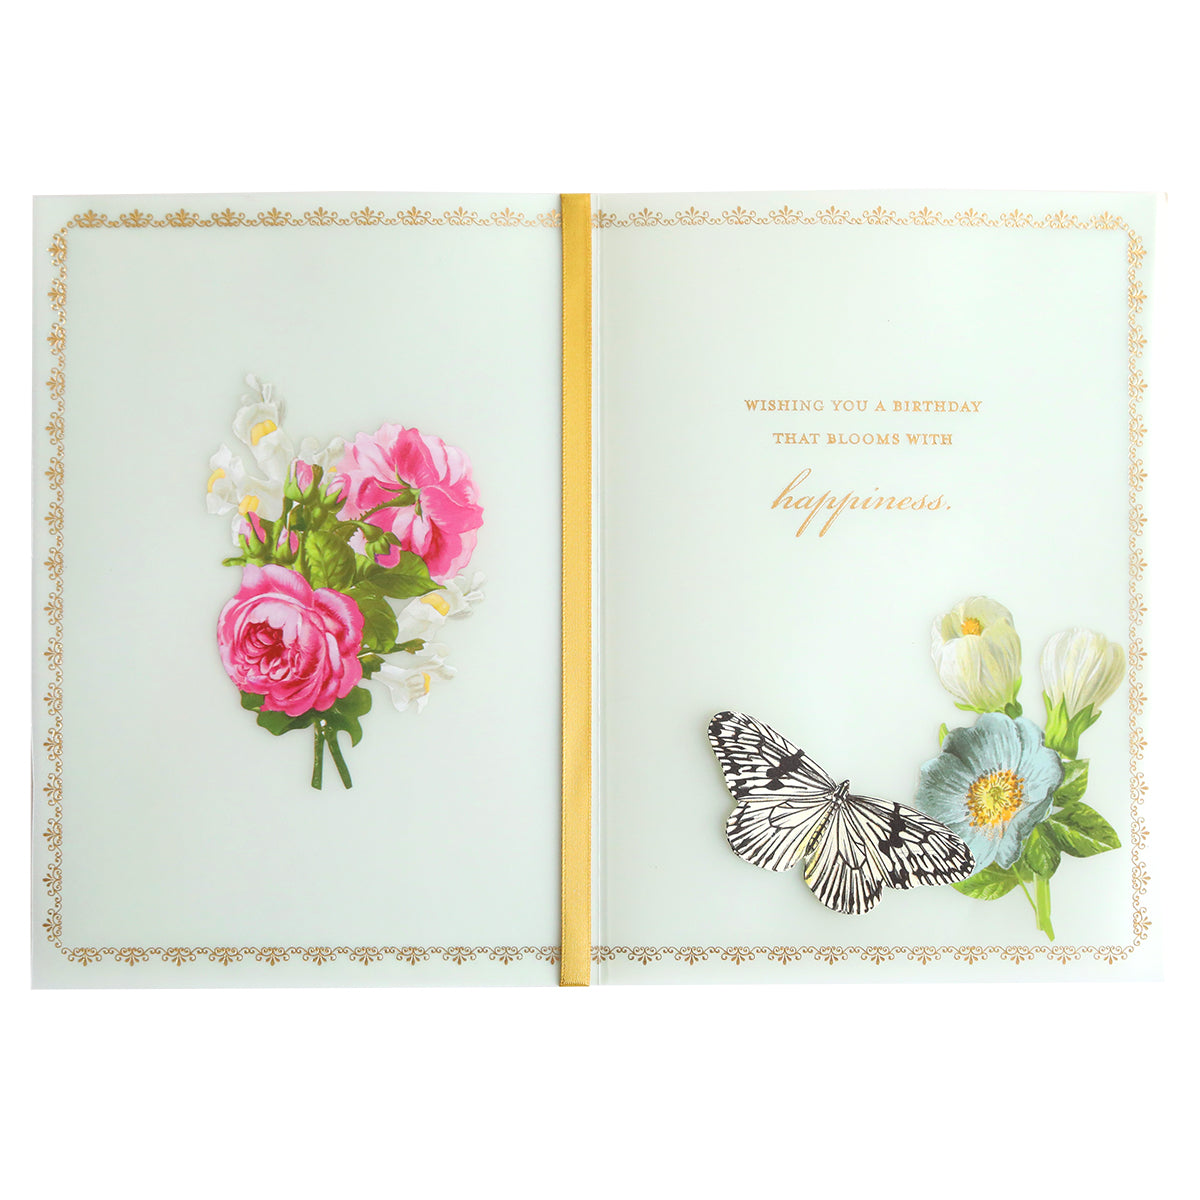 a greeting card with flowers and a butterfly.